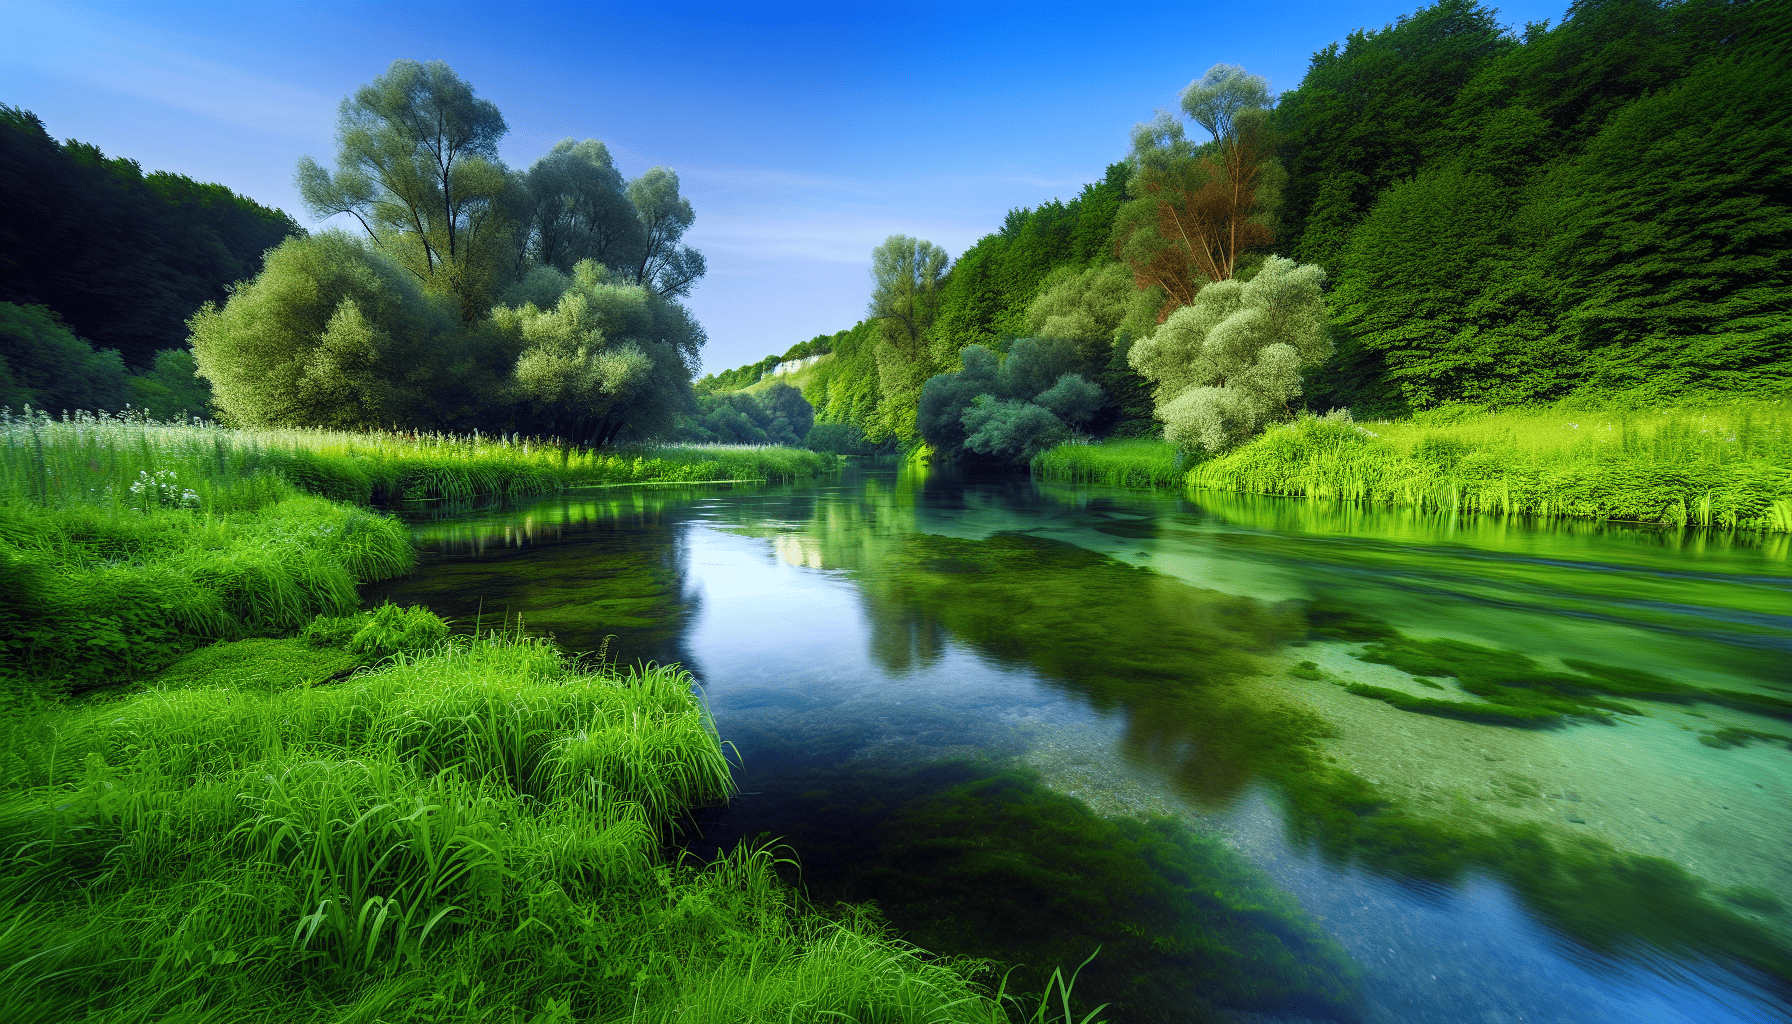 A scenic photo of a tranquil river resembling the River Floss in The Mill on the Floss